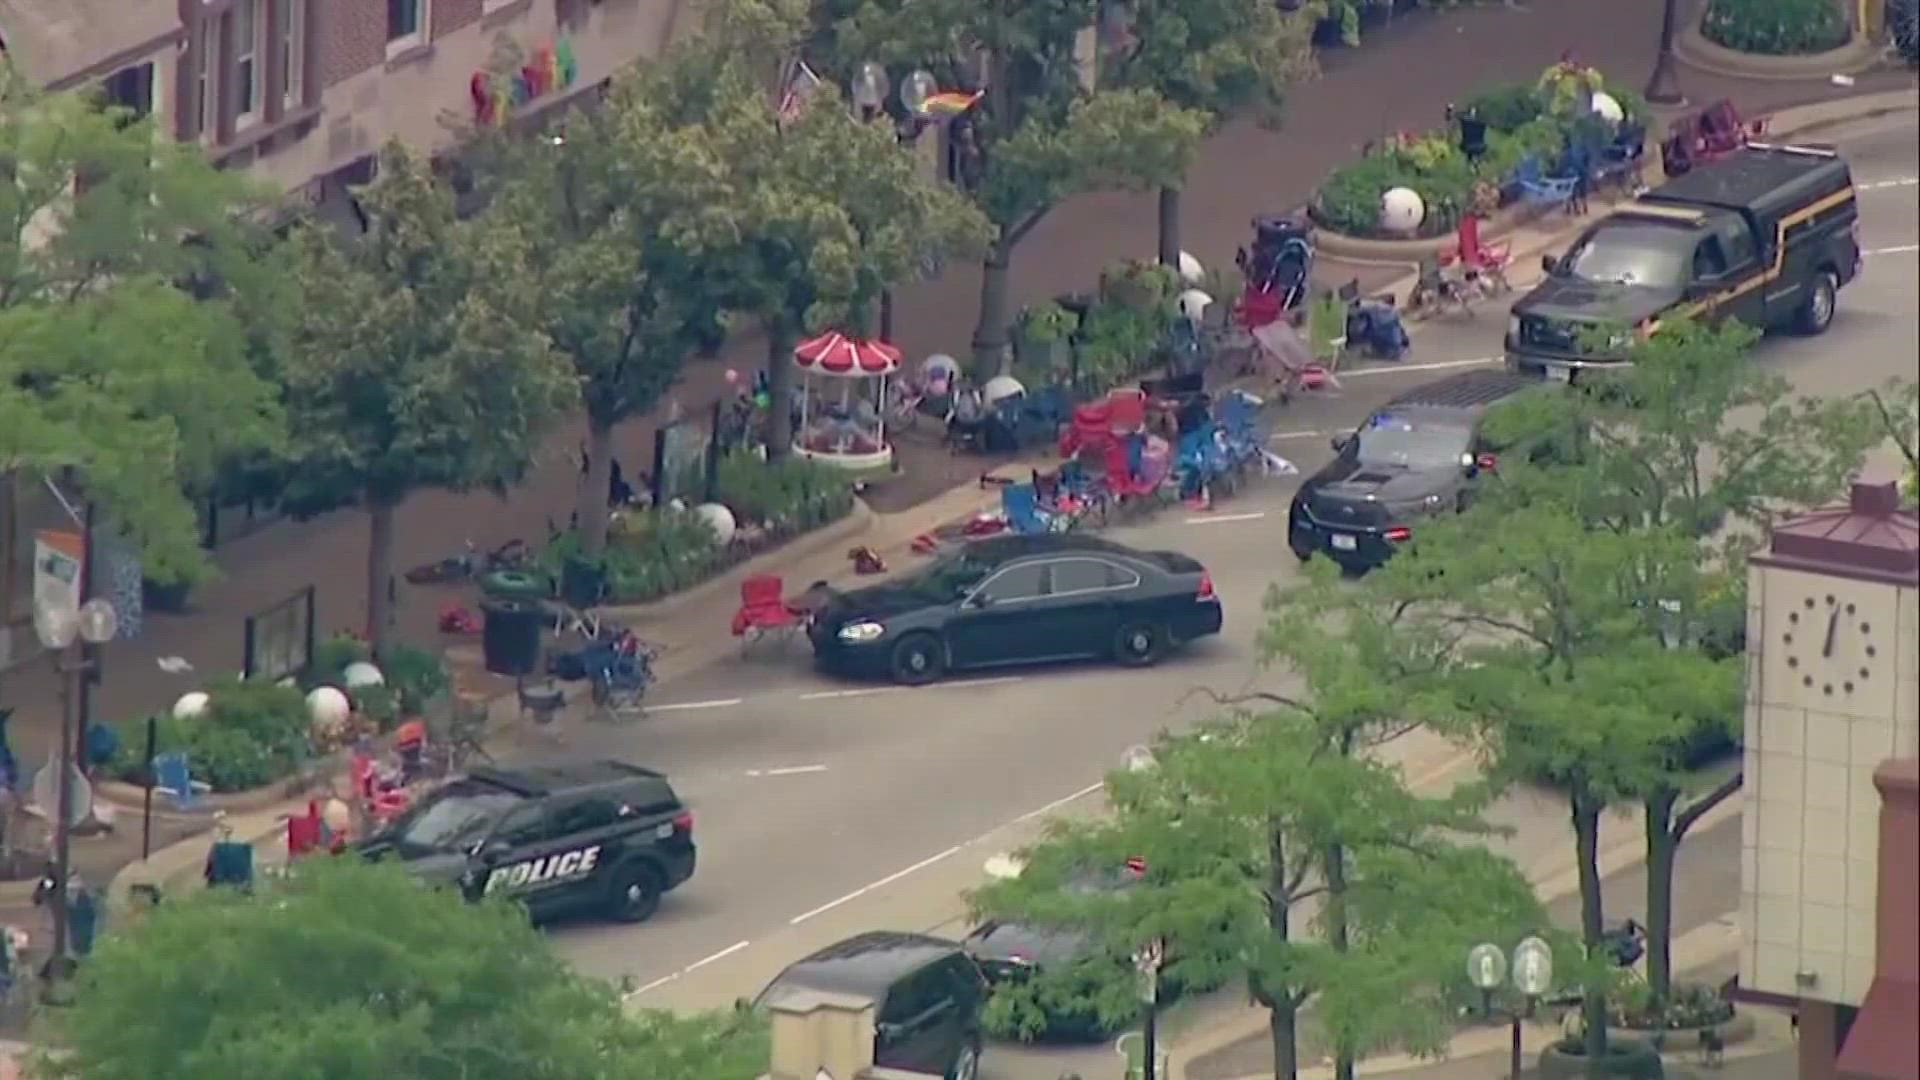 At least six people were killed and dozens were injured in a mass shooting during a Fourth f July parade in Highland Park, Illinois.